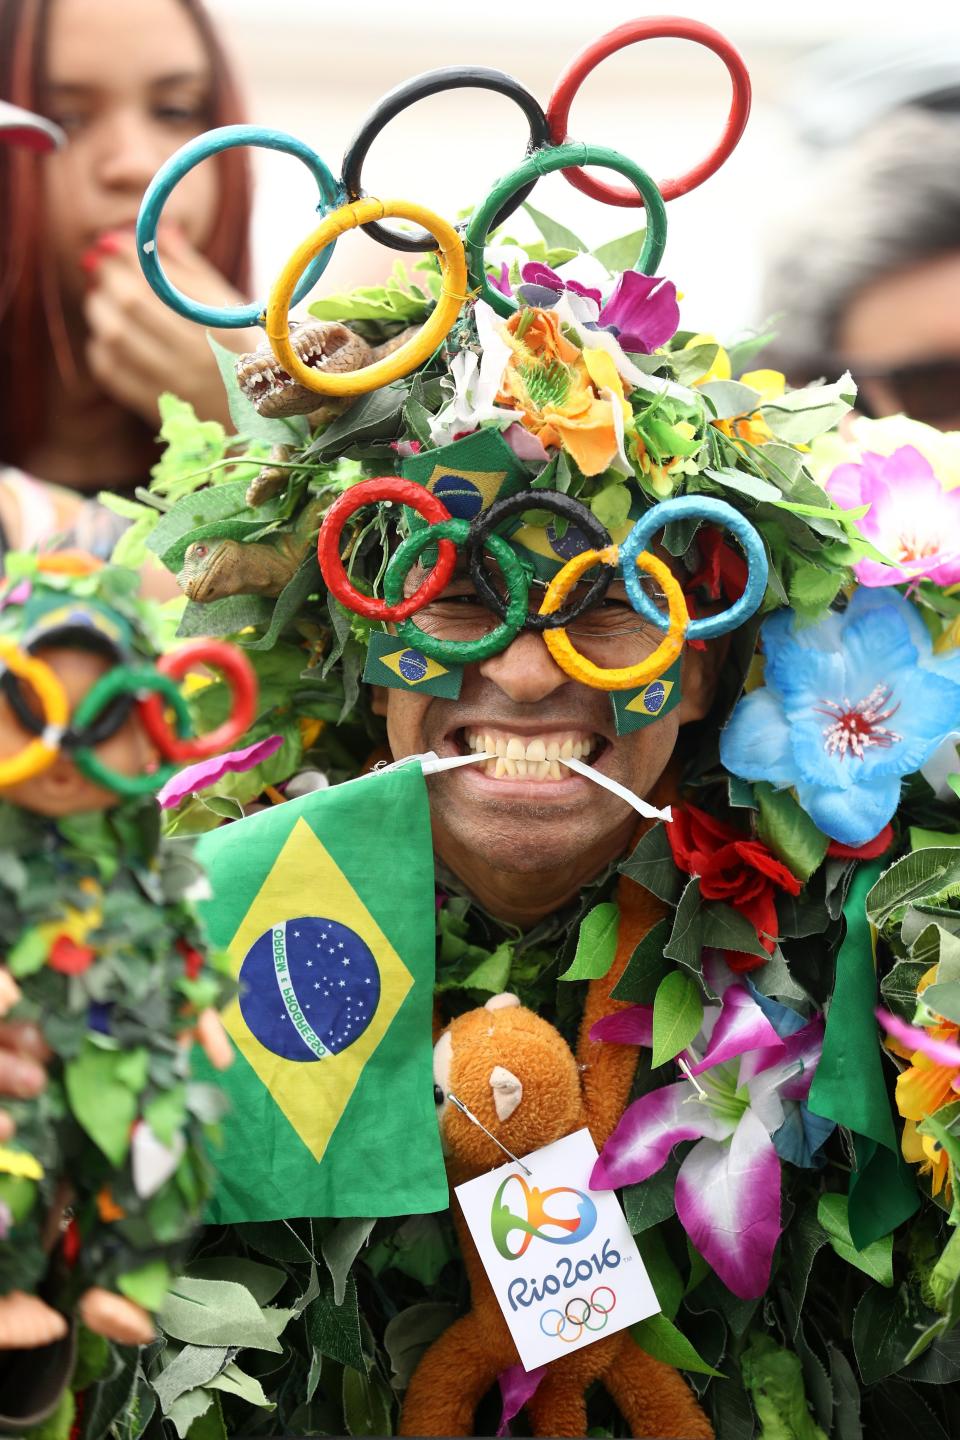 A fan poses before the start of the Women's road cycling race at the Rio 2016 Olympic Games at Fort Copacabana in Rio de Janeiro on August 7, 2016.